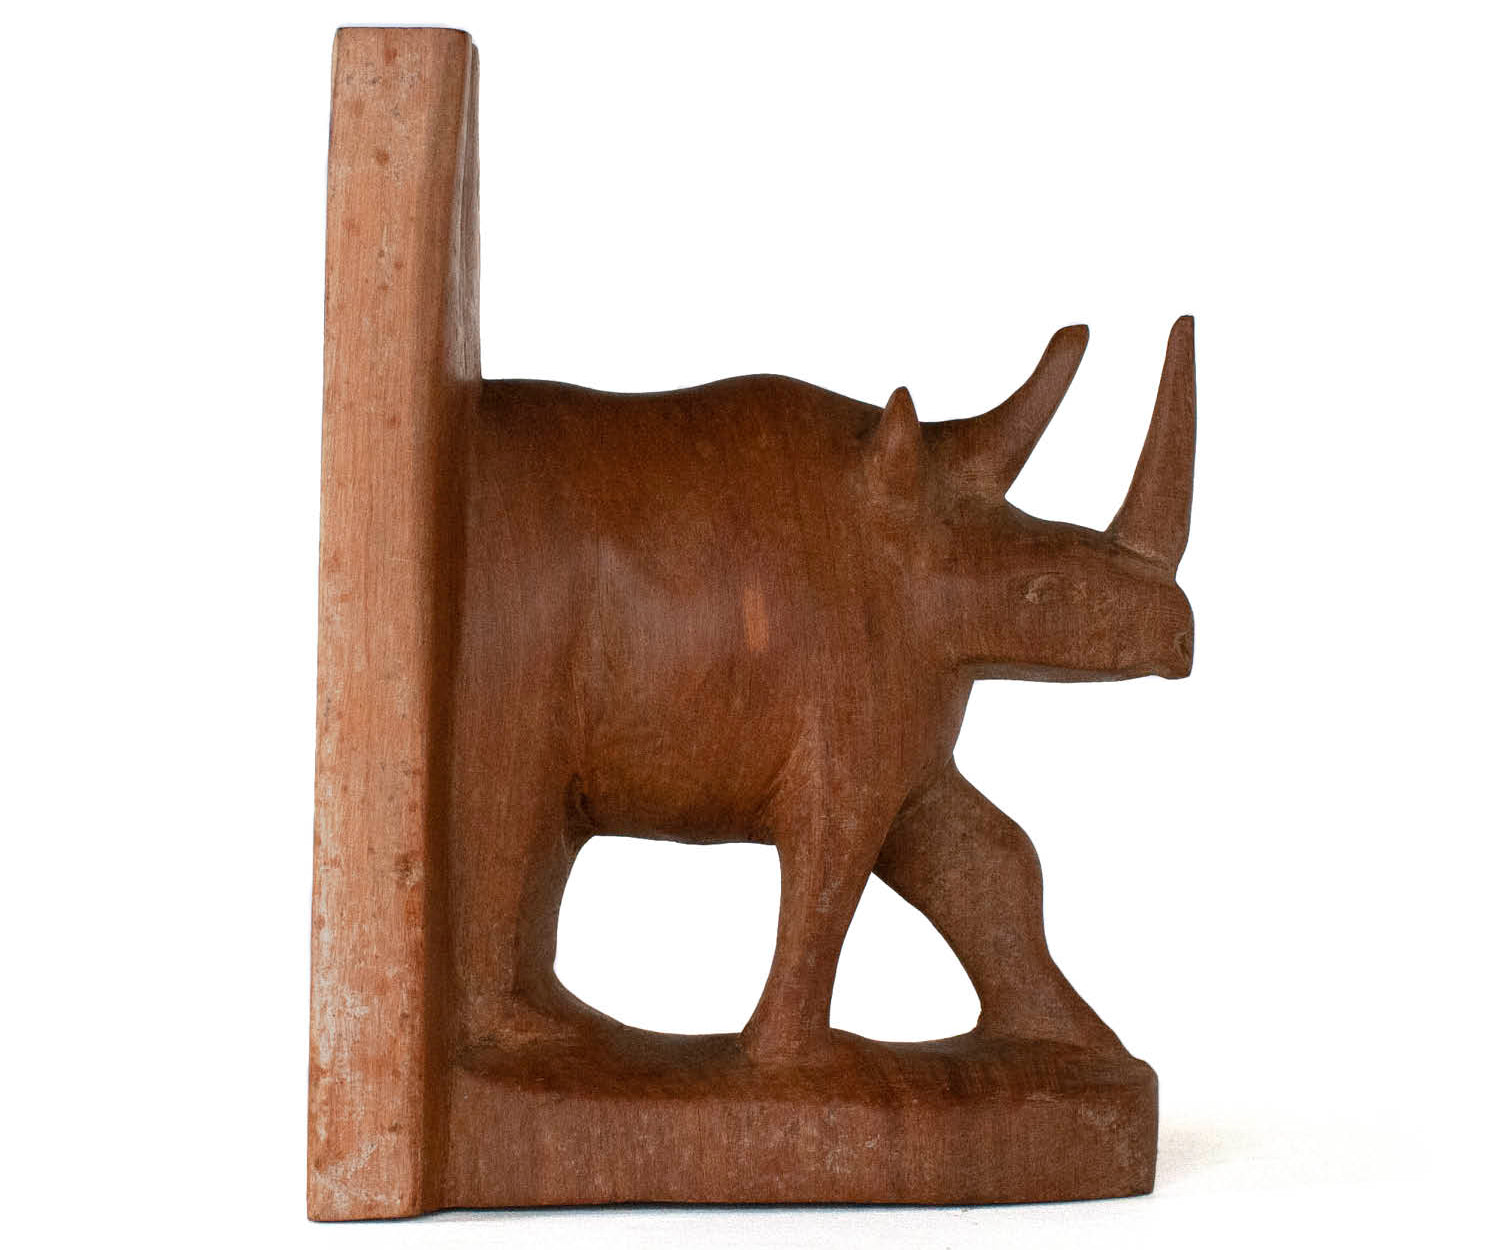 Vintage Object : Rhyno Bookend | LIKE THIS SHOP